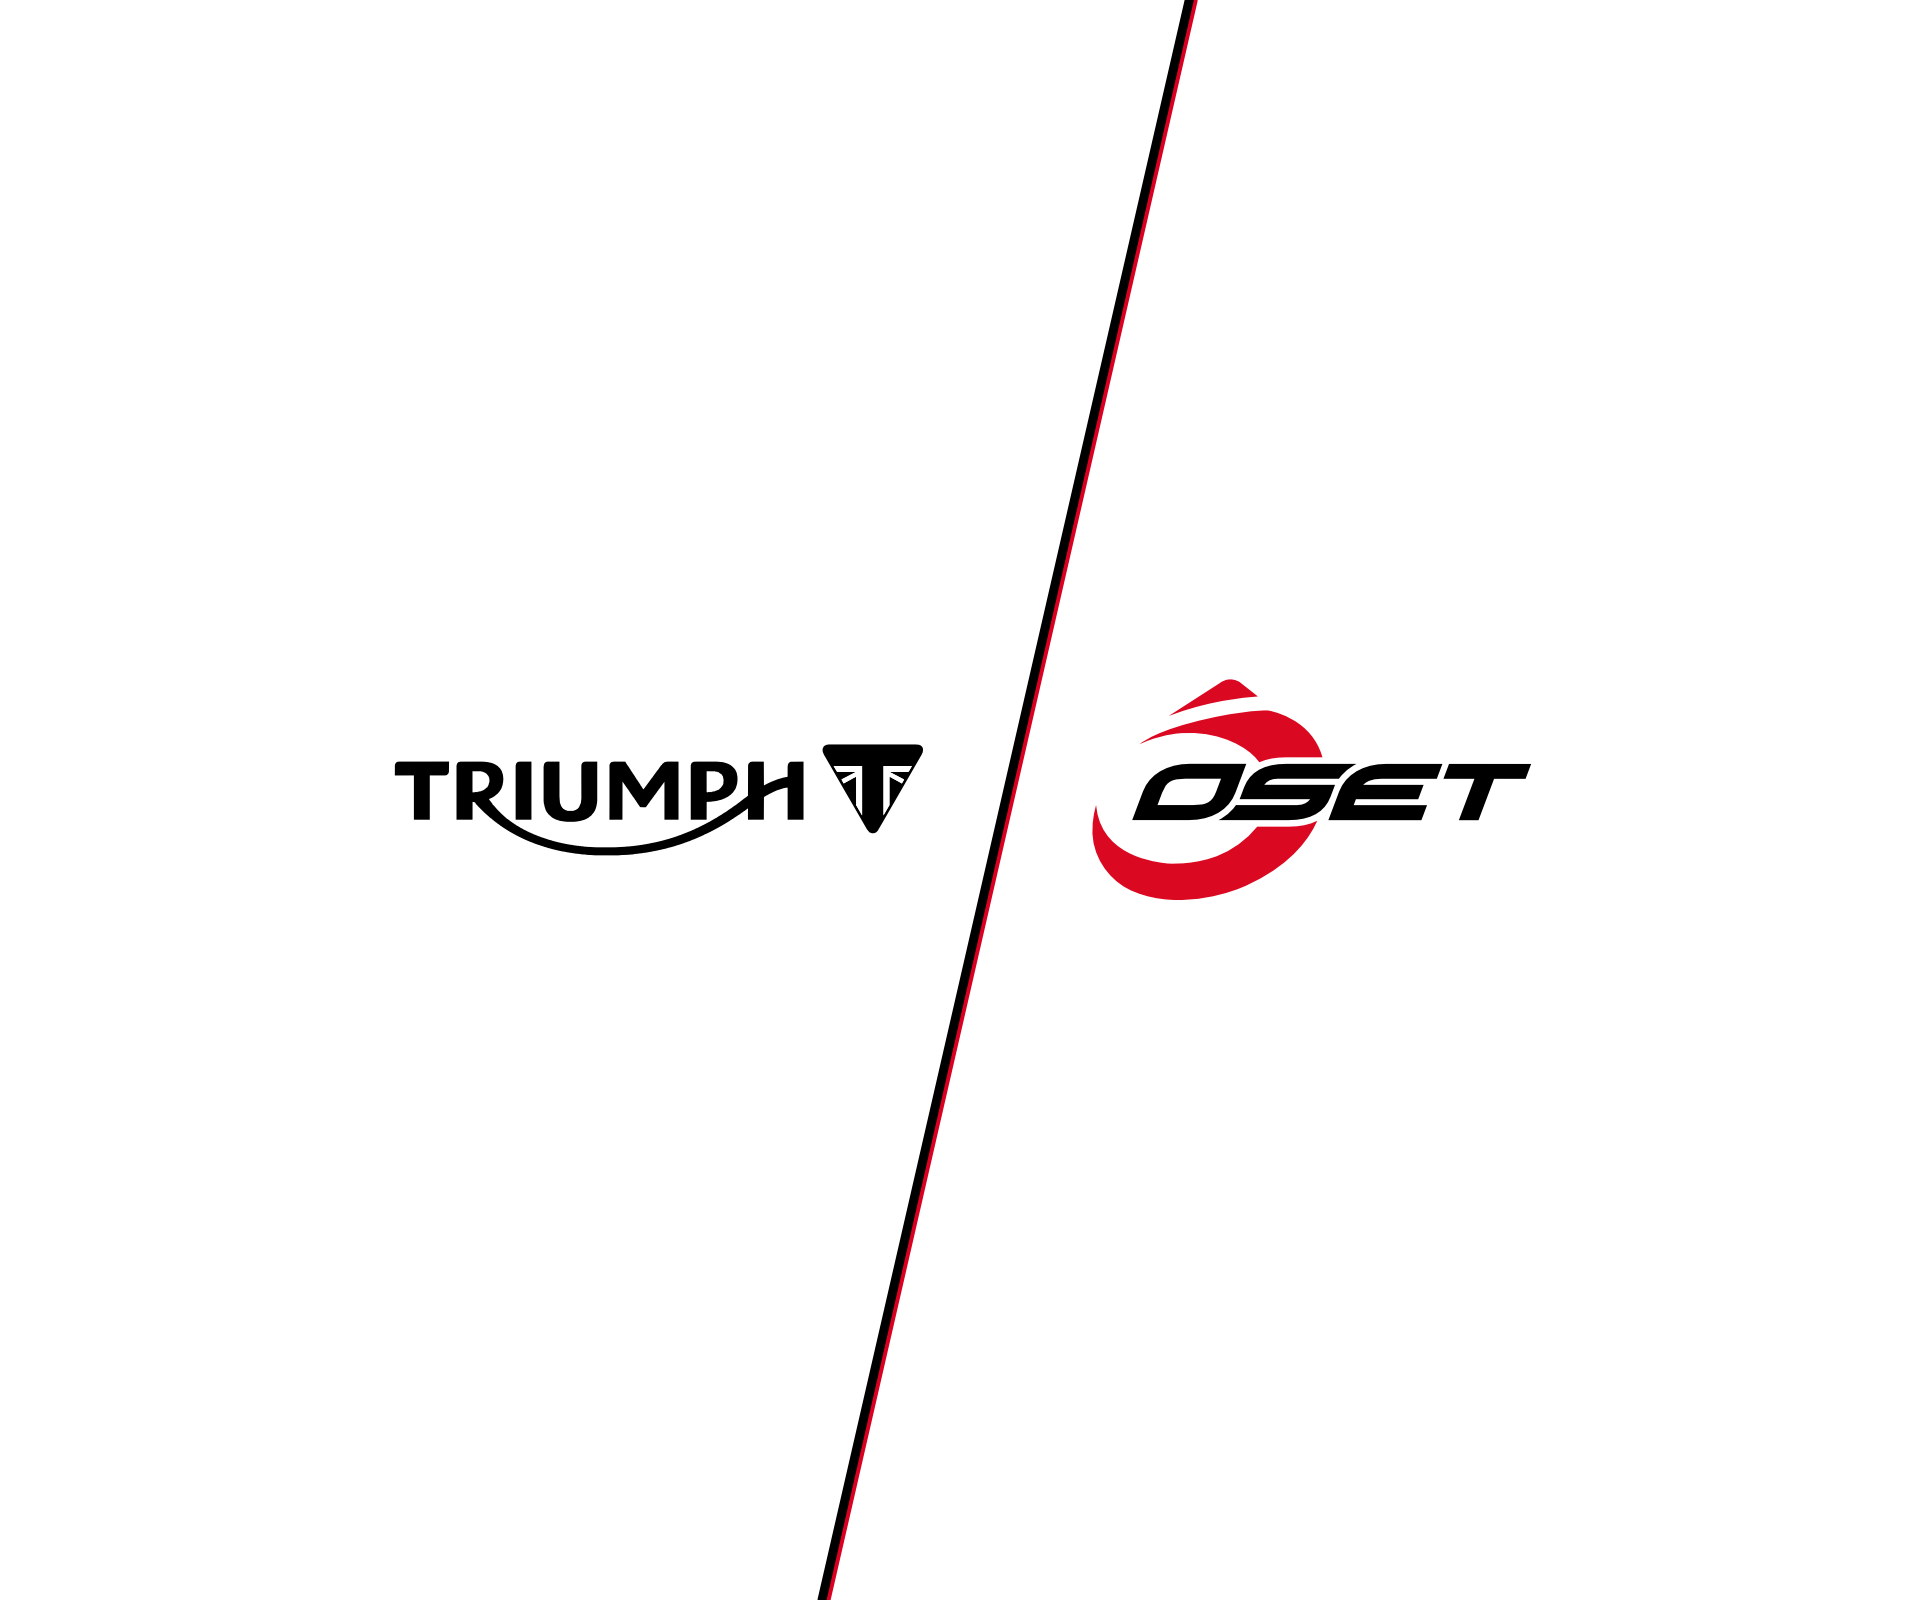 Triumph Announces The Acquisition Of The Electric Motorcycle Manufacturer Oset Bikes